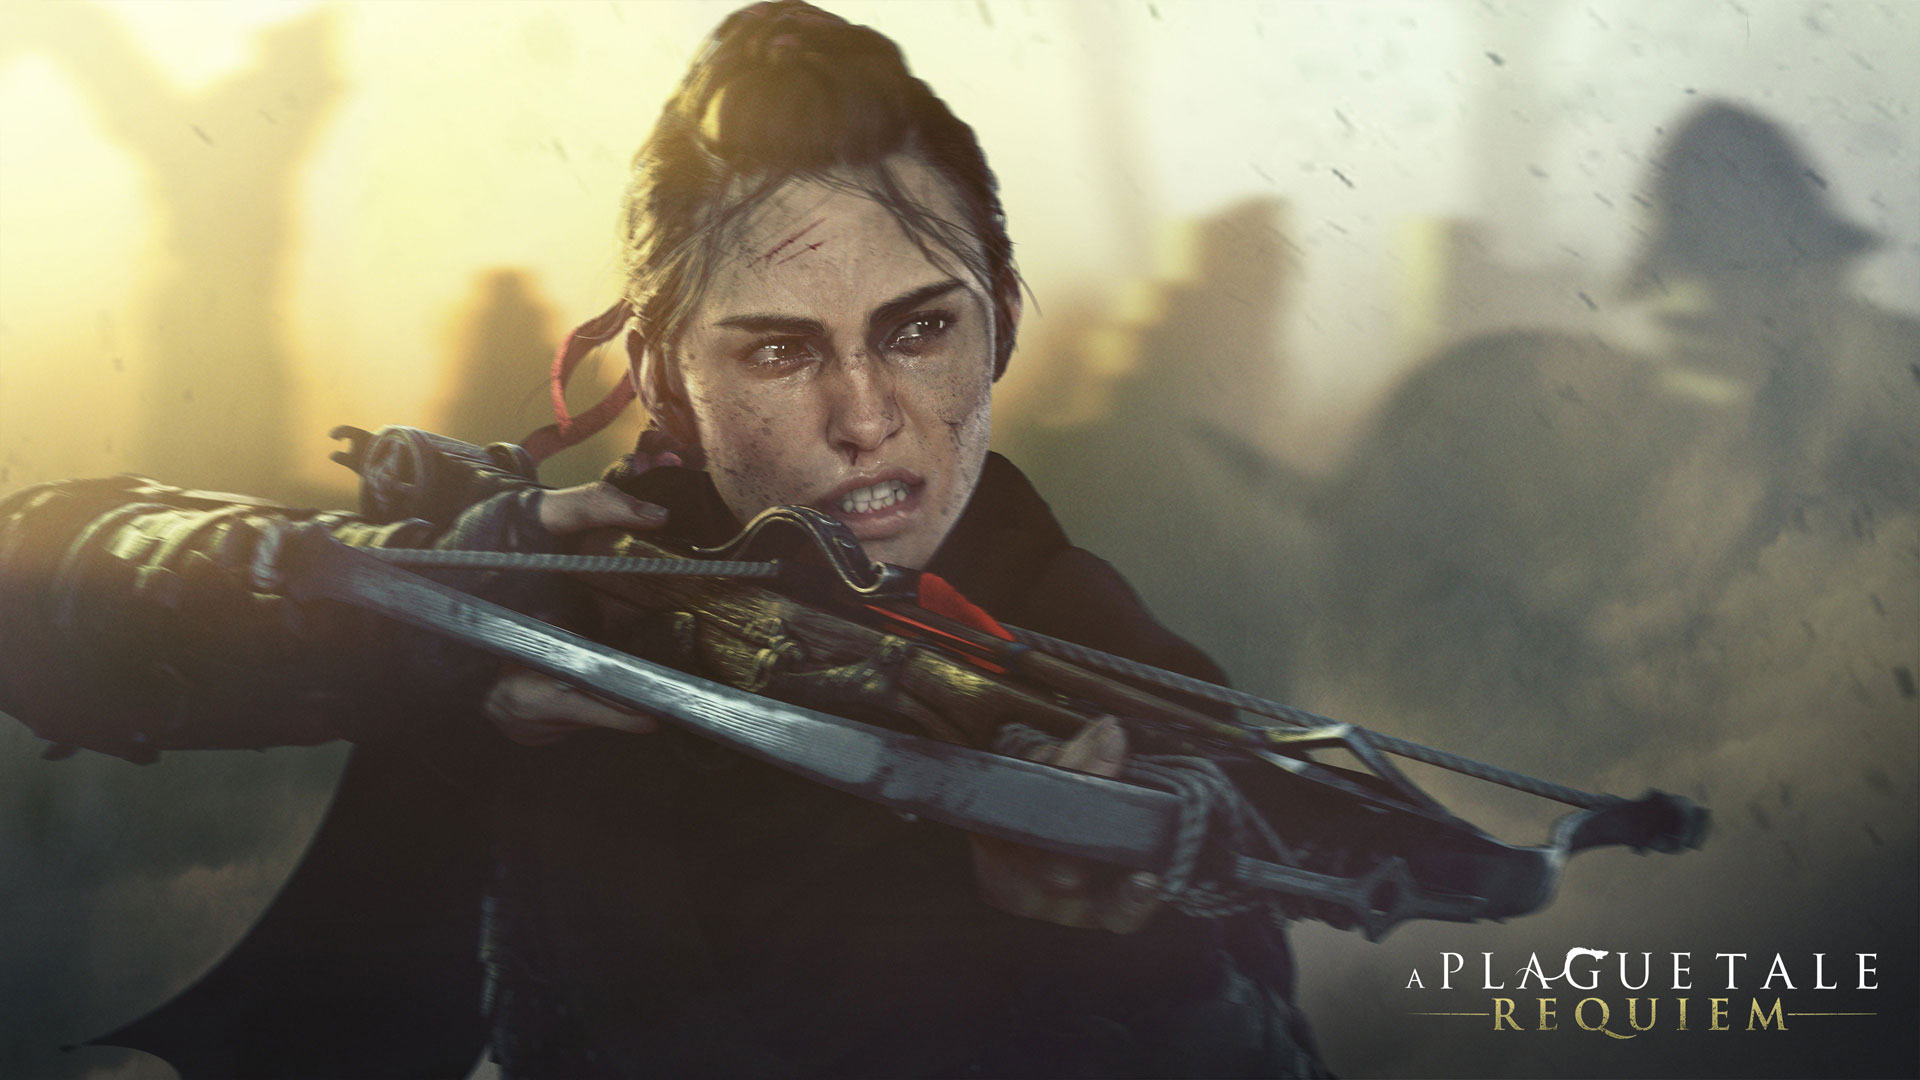 Want some A Plague Tale Requiem 4K wallpapers for desktop and mobile See  the stickied comment under this post  rAPlagueTale